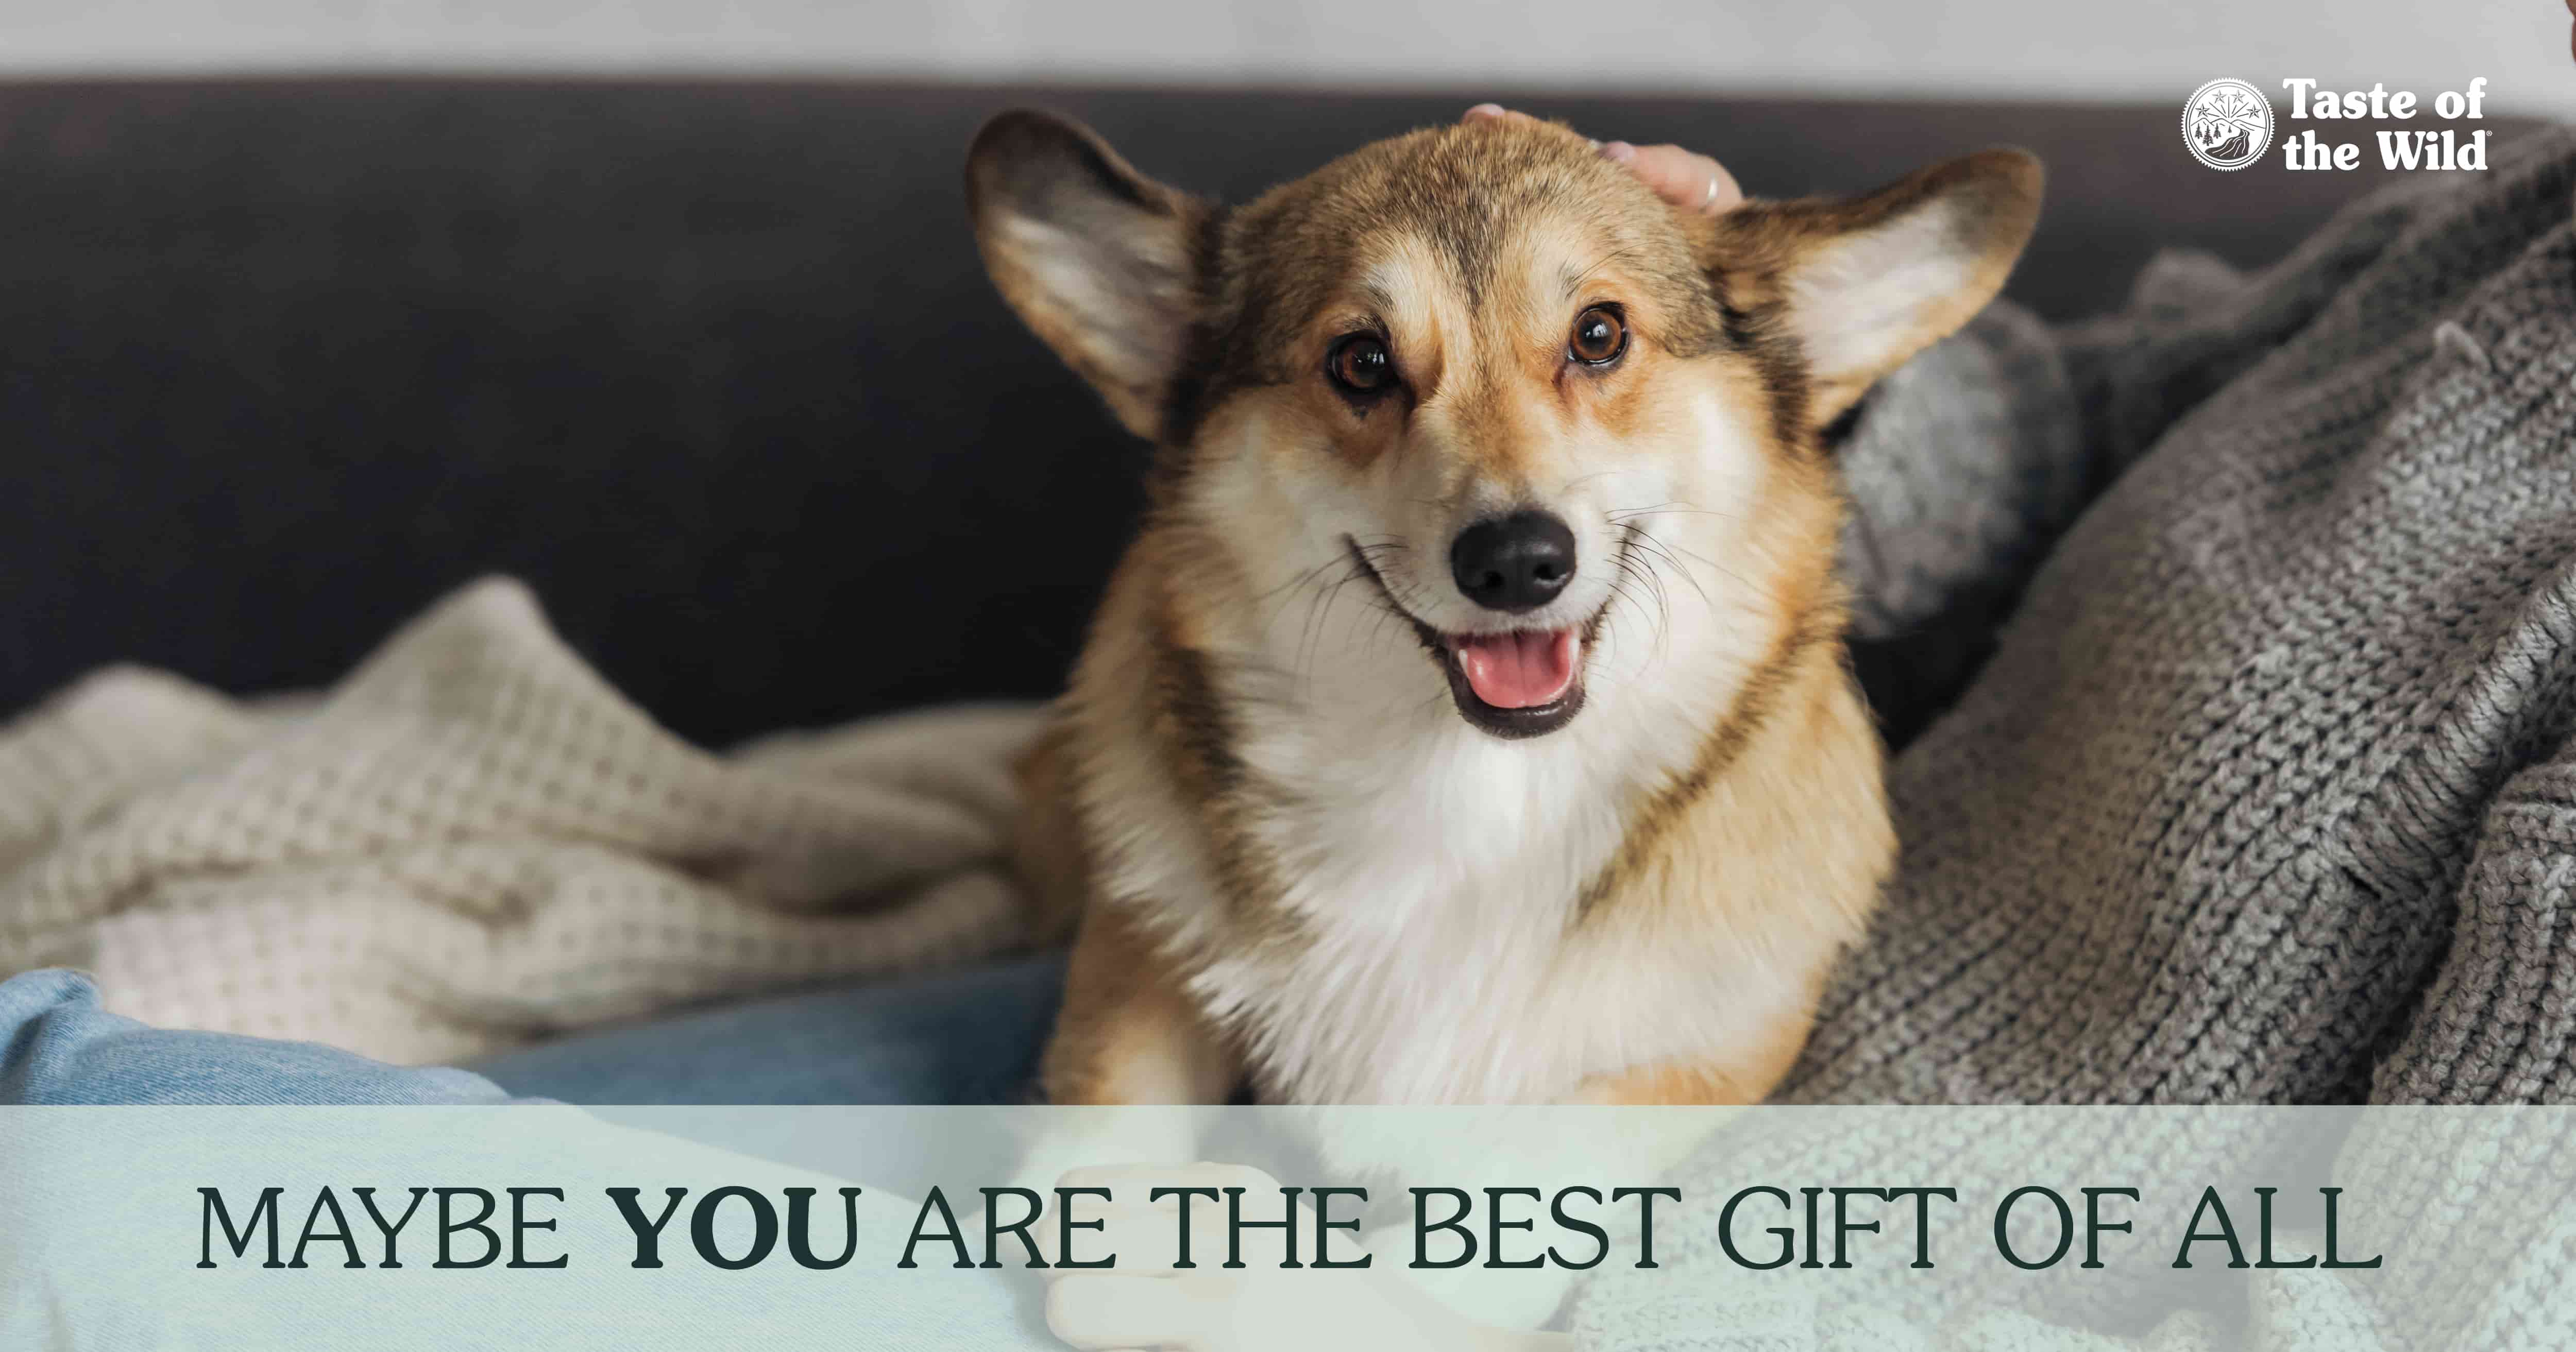 A dog lying on its owner's lap on a couch next to text that reads, ‘Maybe you are the best gift of all’.